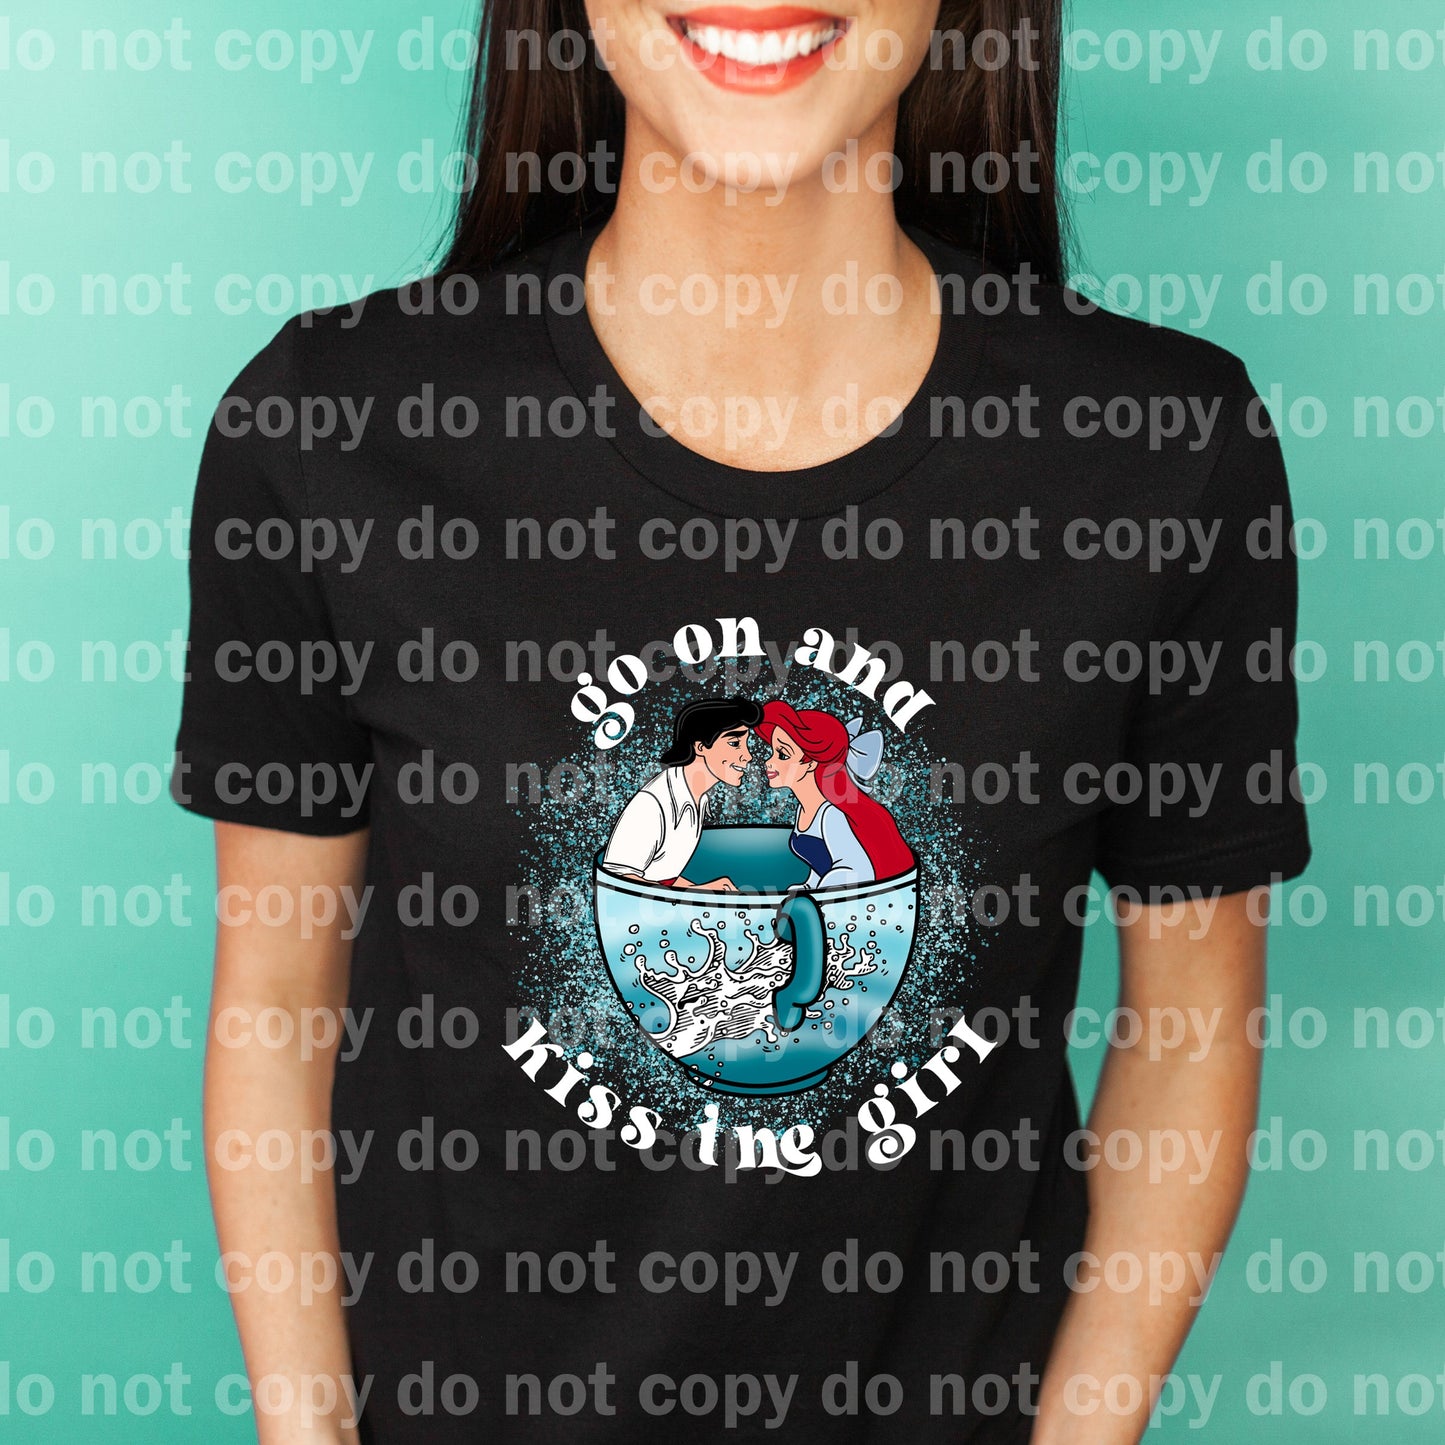 Go On And Kiss The Girl Black/White Dream Print or Sublimation Print